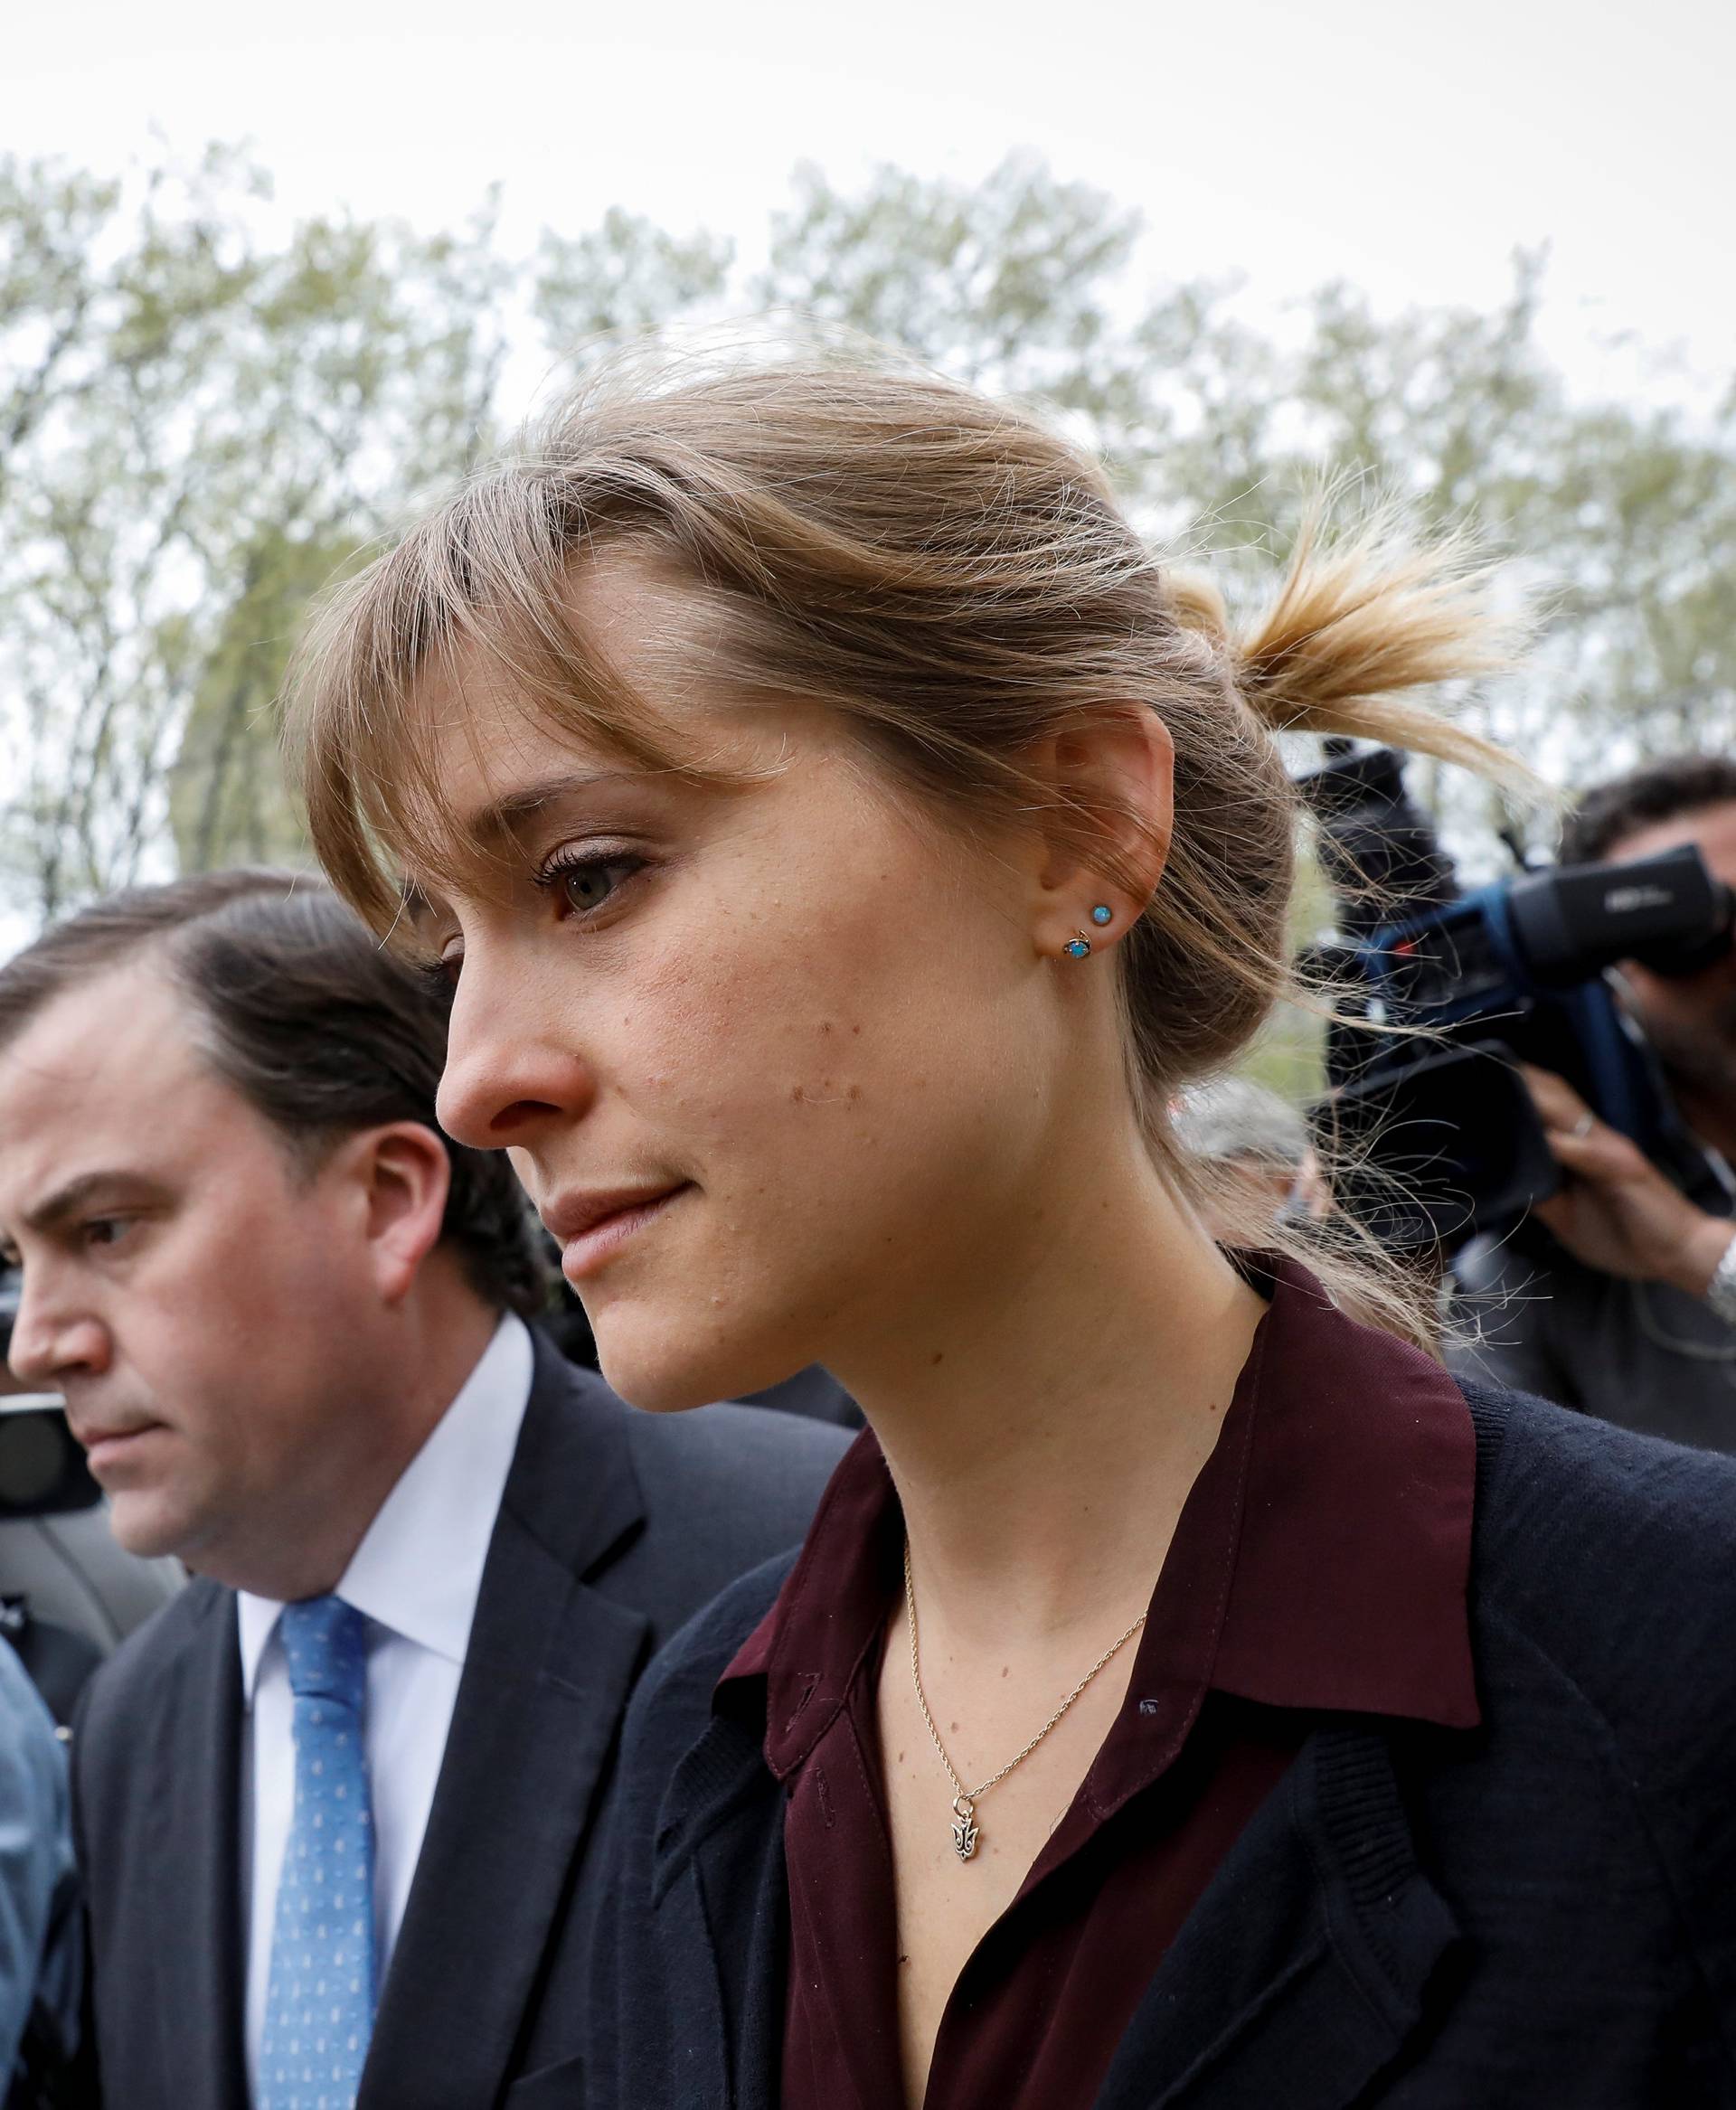 Actor Allison Mack, known for her role in the TV series 'Smallville', exits with her lawyer following a hearing on charges of sex trafficking in relation to the Albany-based organization Nxivm at United States Federal Courthouse in Brooklyn, New York